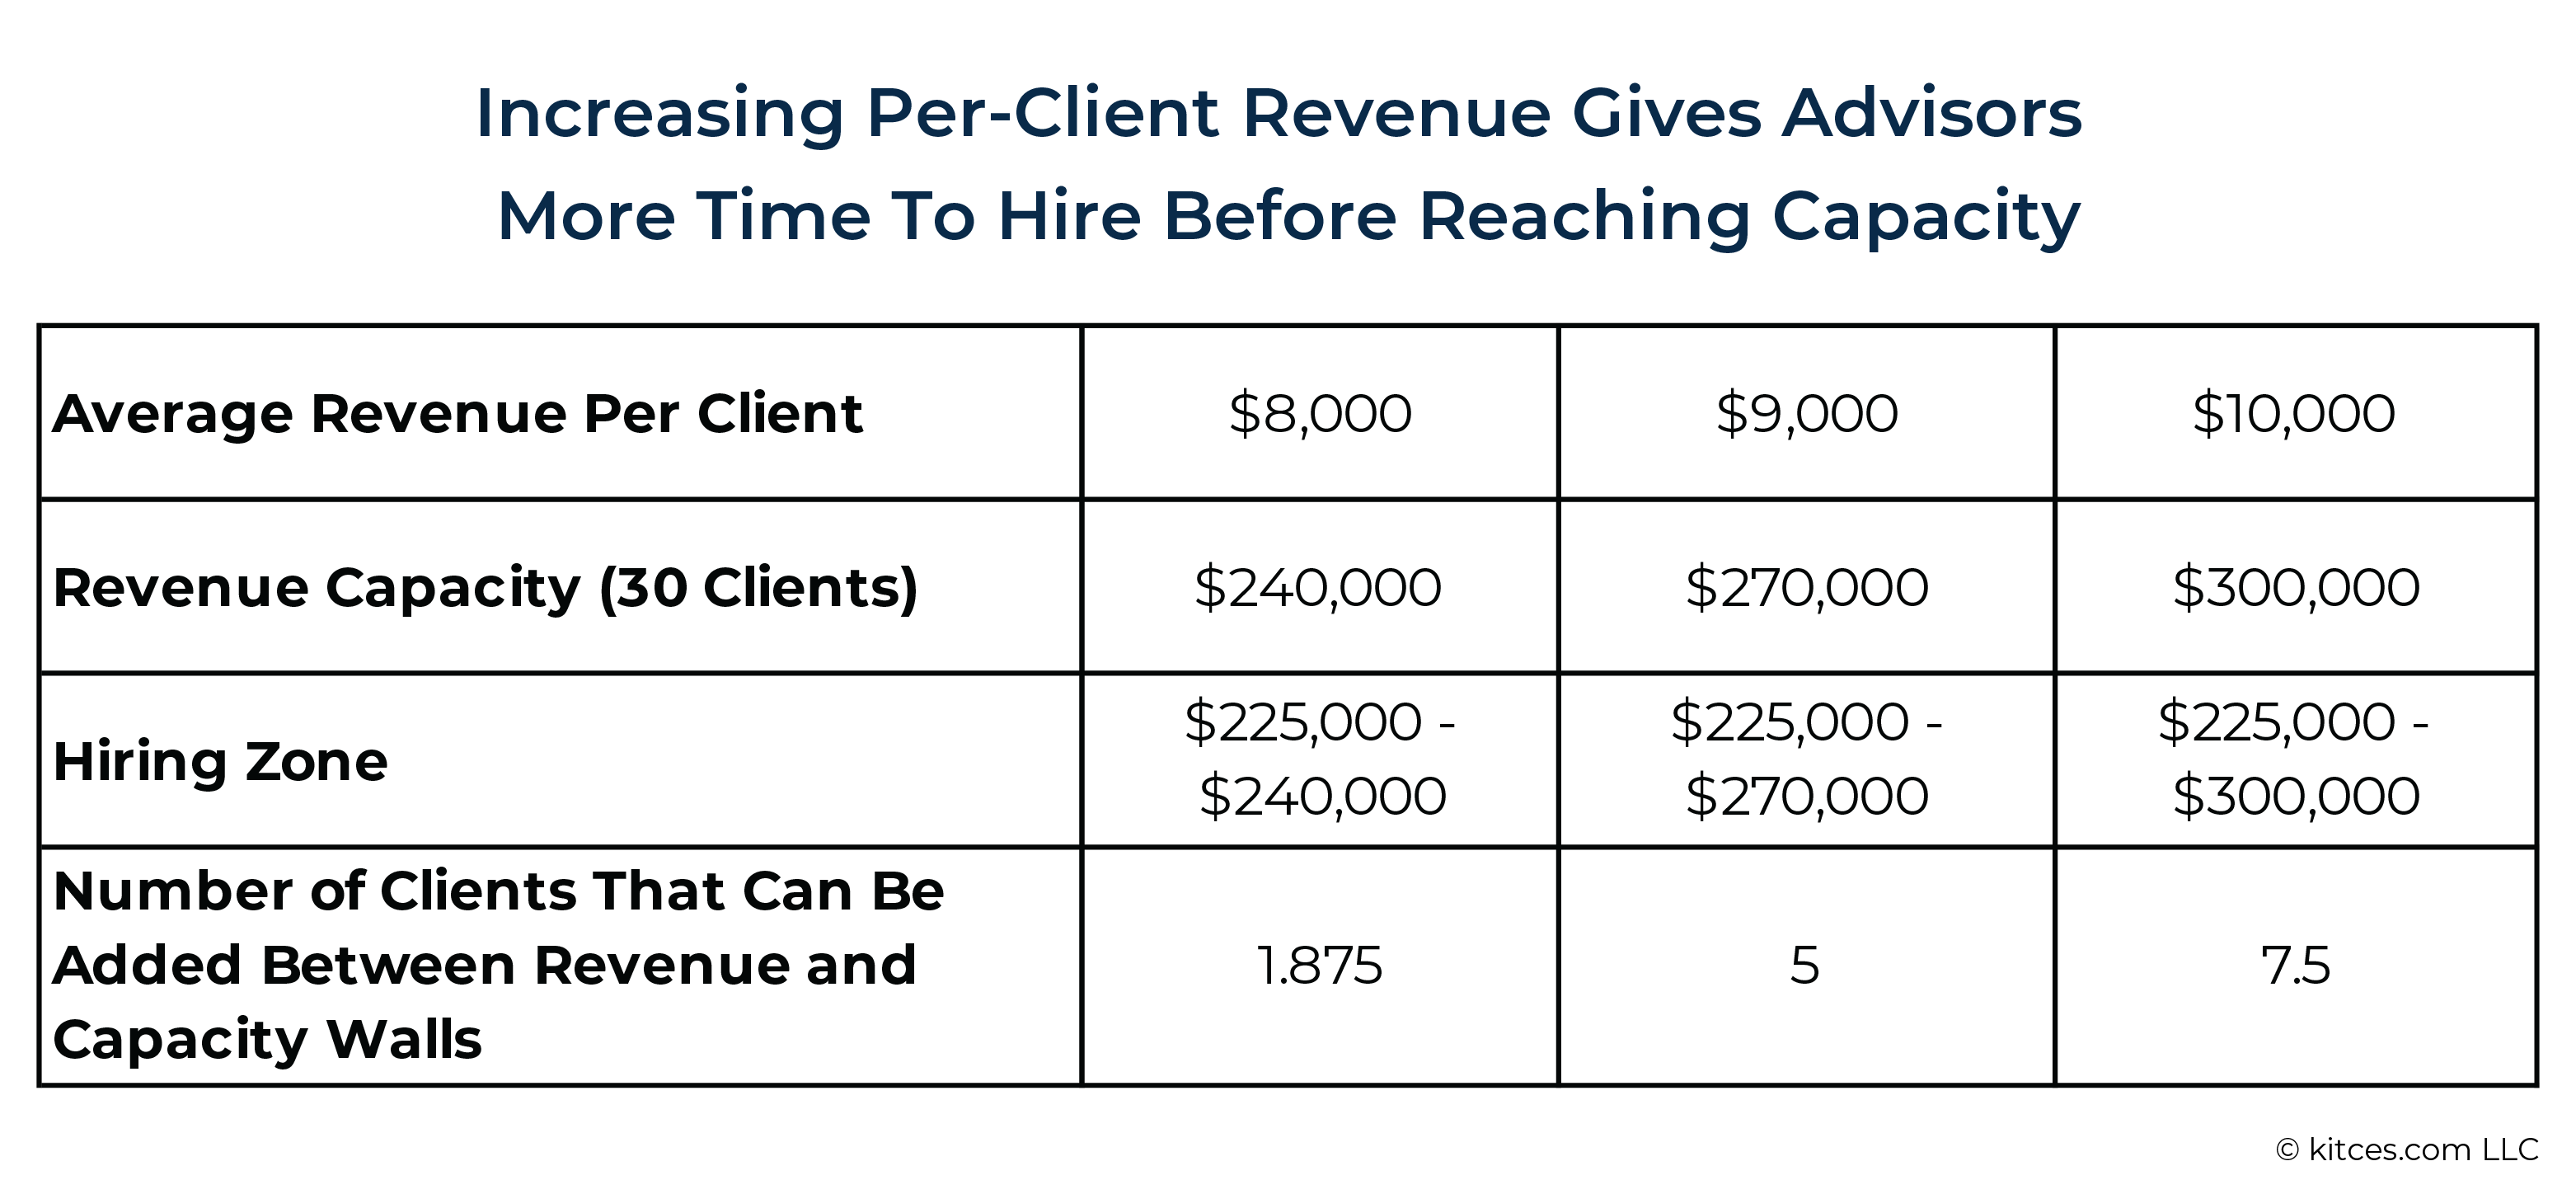 Increasing Per Client Revenue Gives Advisors More Time To Hire Before Reaching Capacity